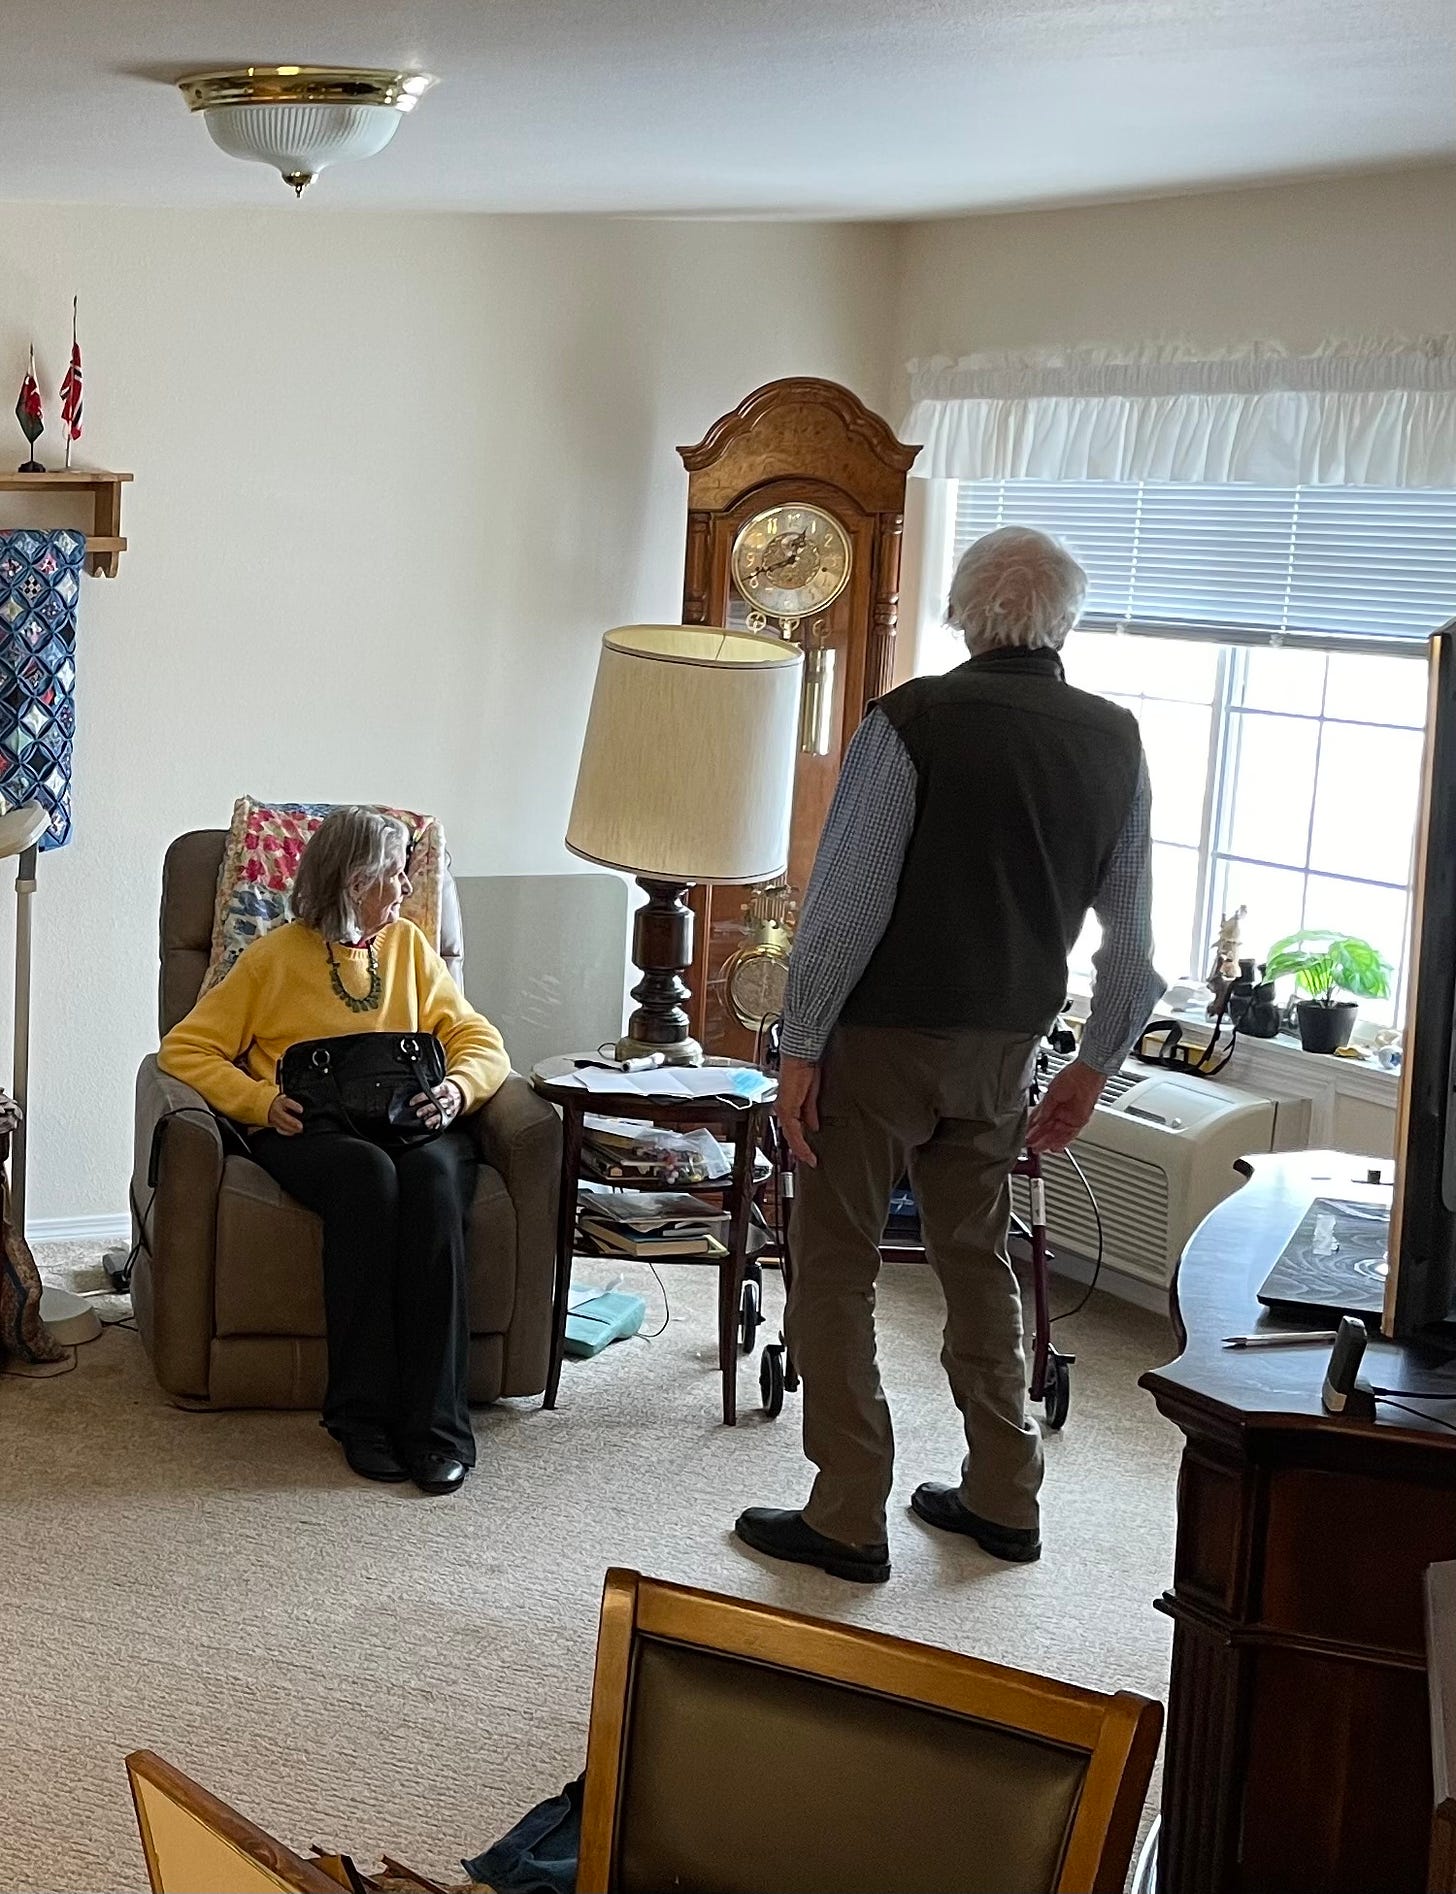 An older woman and sits and older man stands in a living room, looking out the window